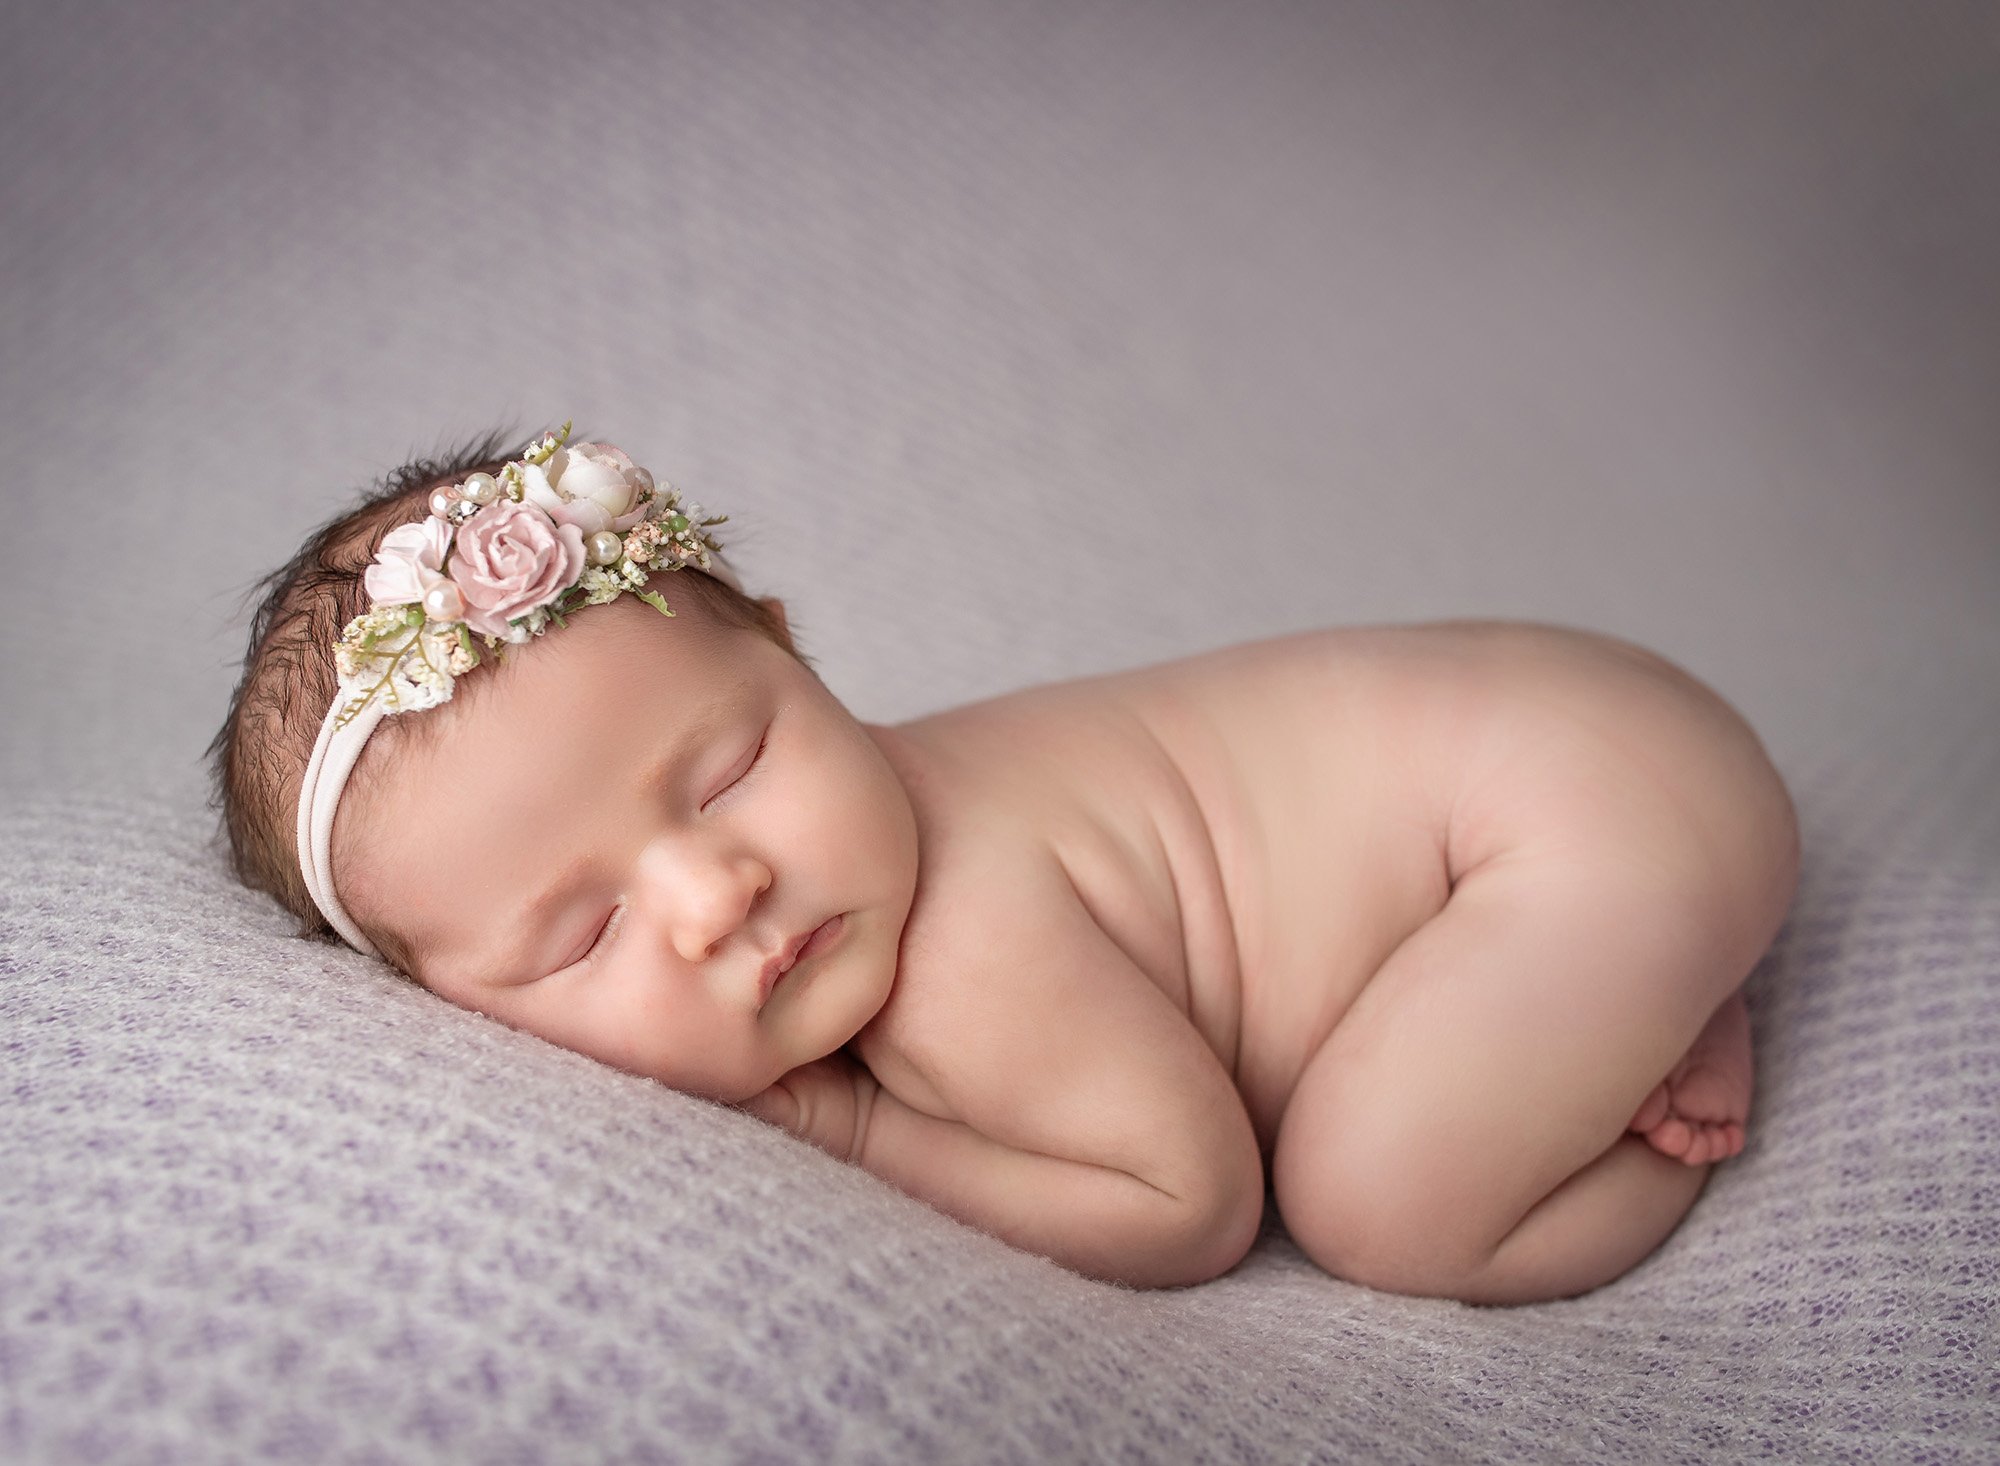 naked baby girl laying on her stomach with elegant floral headband on white blanket